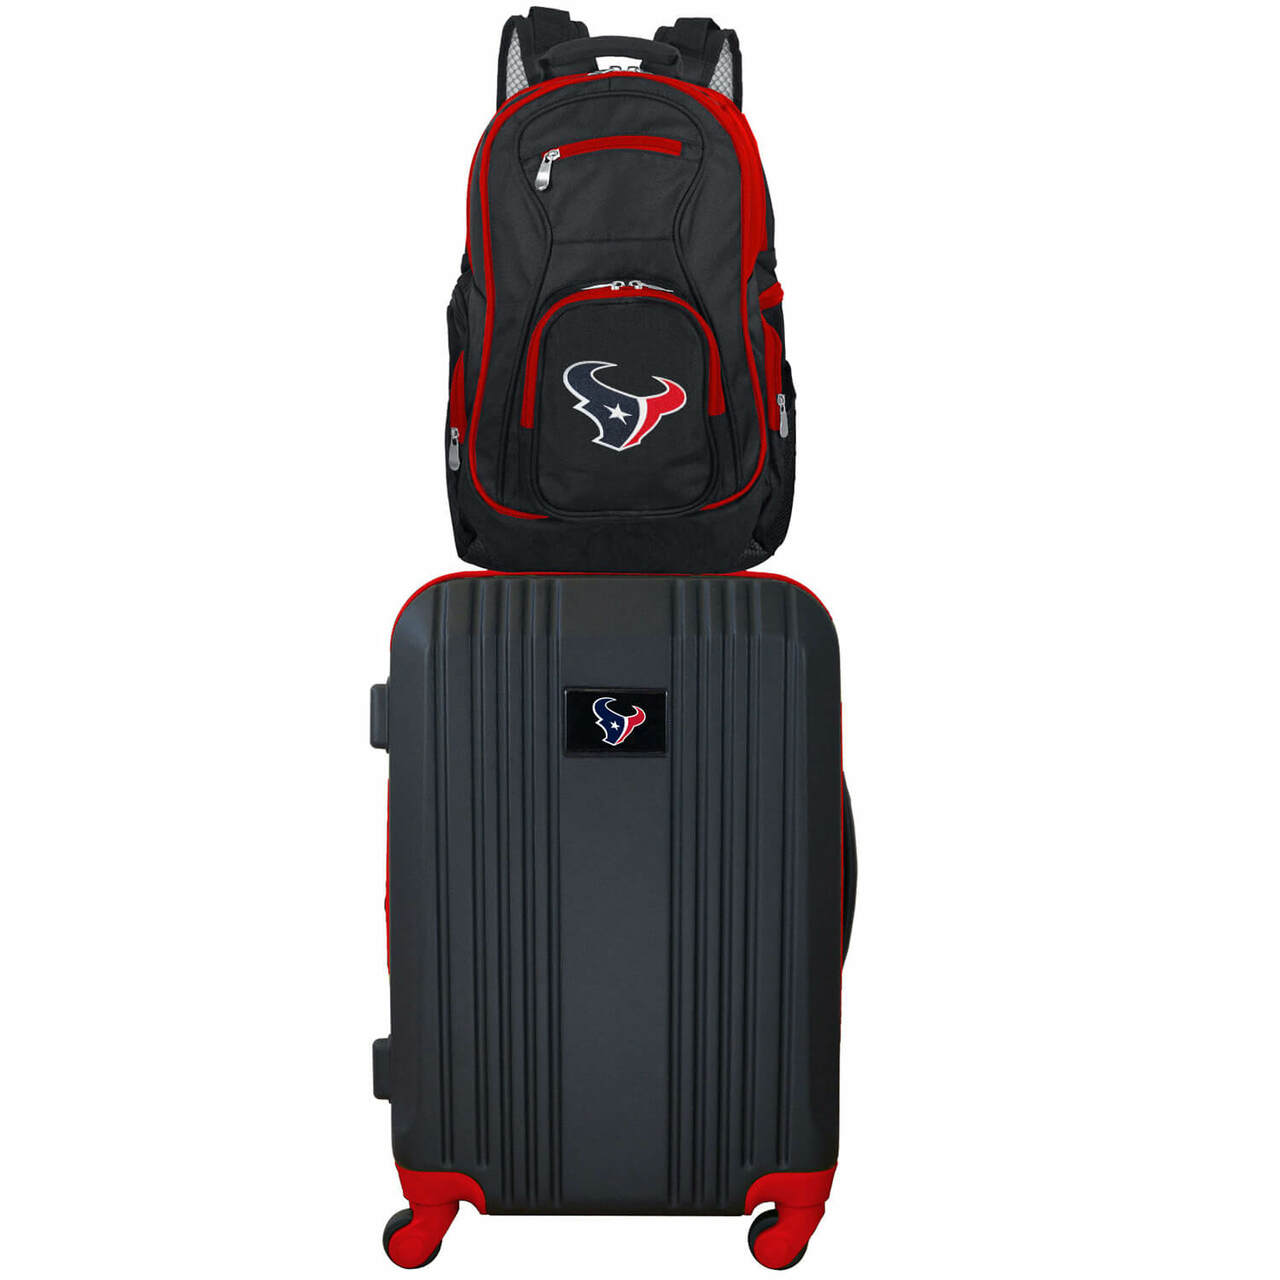 Houston Texans 2 Piece Premium Colored Trim Backpack and Luggage Set